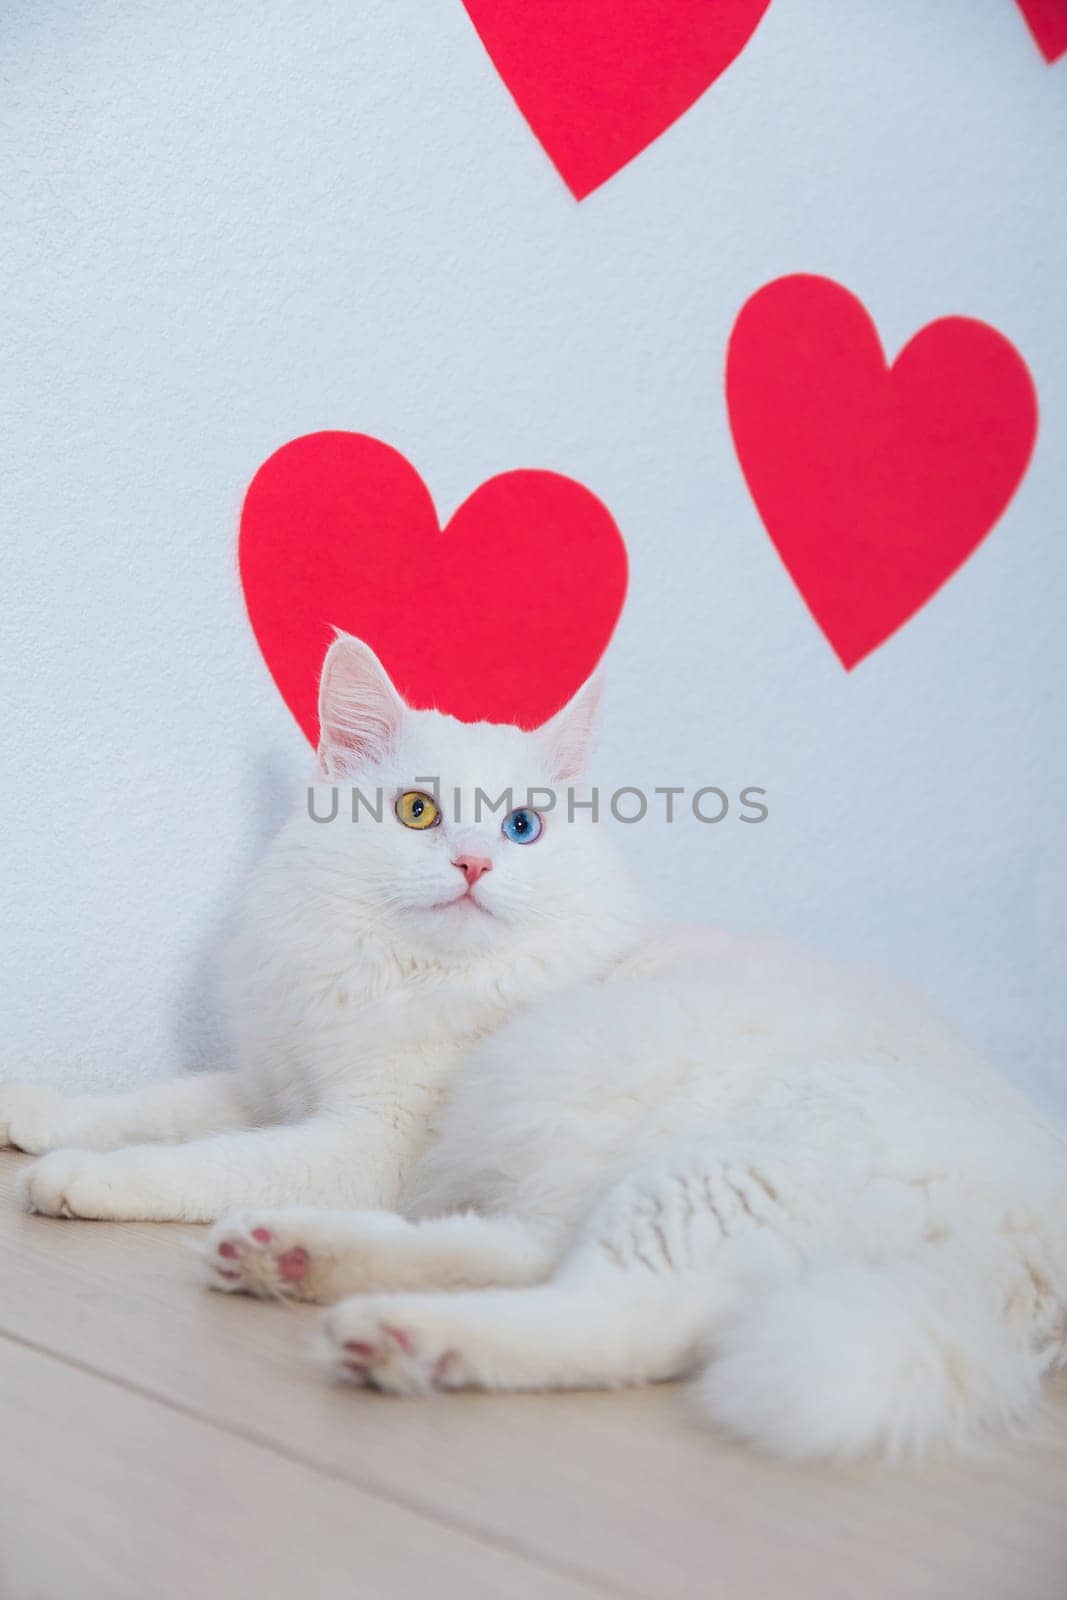 A white fluffy Angora cat with multicolored eyes lies impressively against the background of hearts